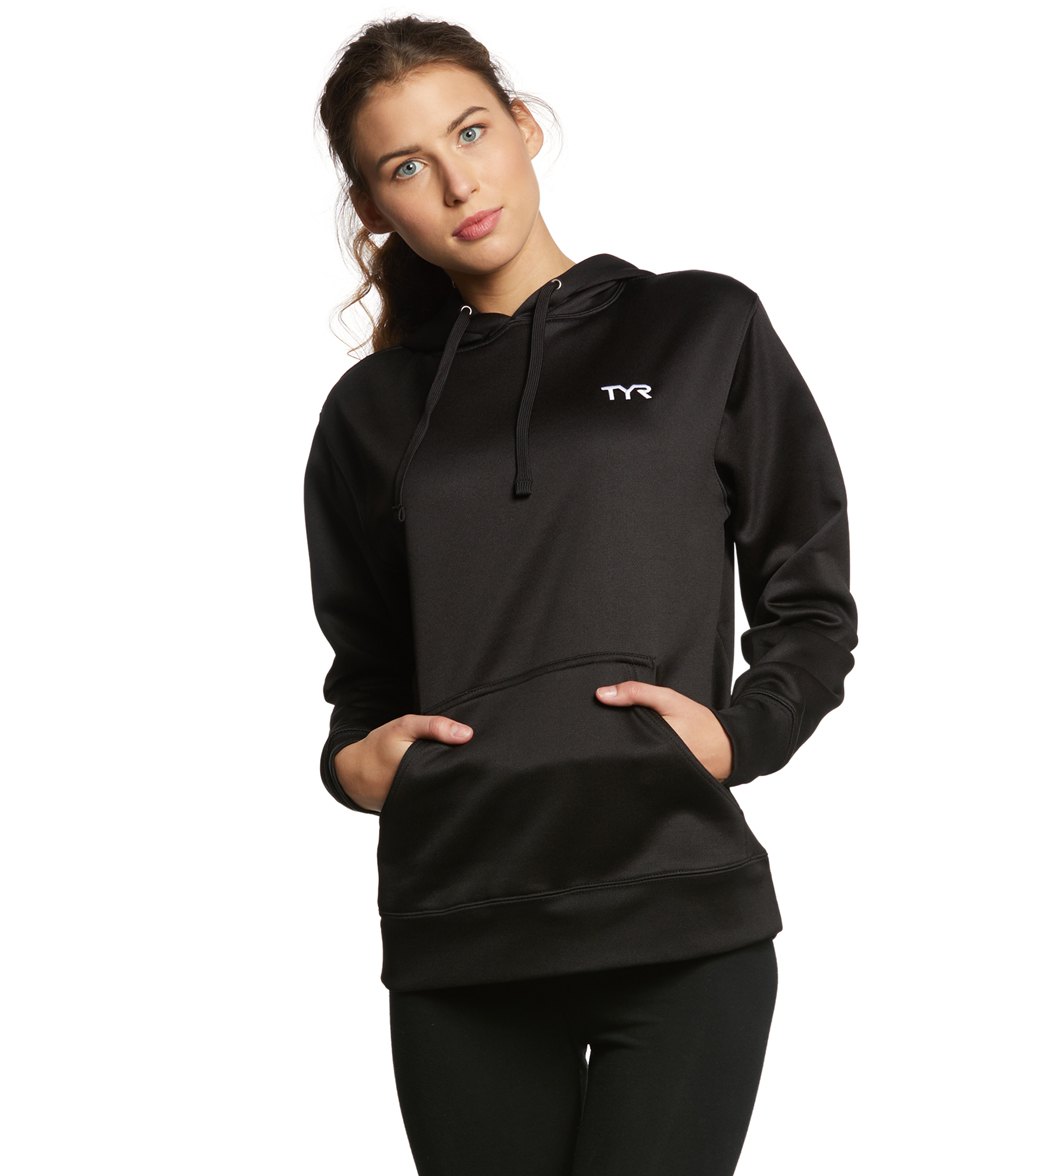 TYR Women's Alliance Pullover Hoodie - Black Xxl Cotton/Polyester - Swimoutlet.com